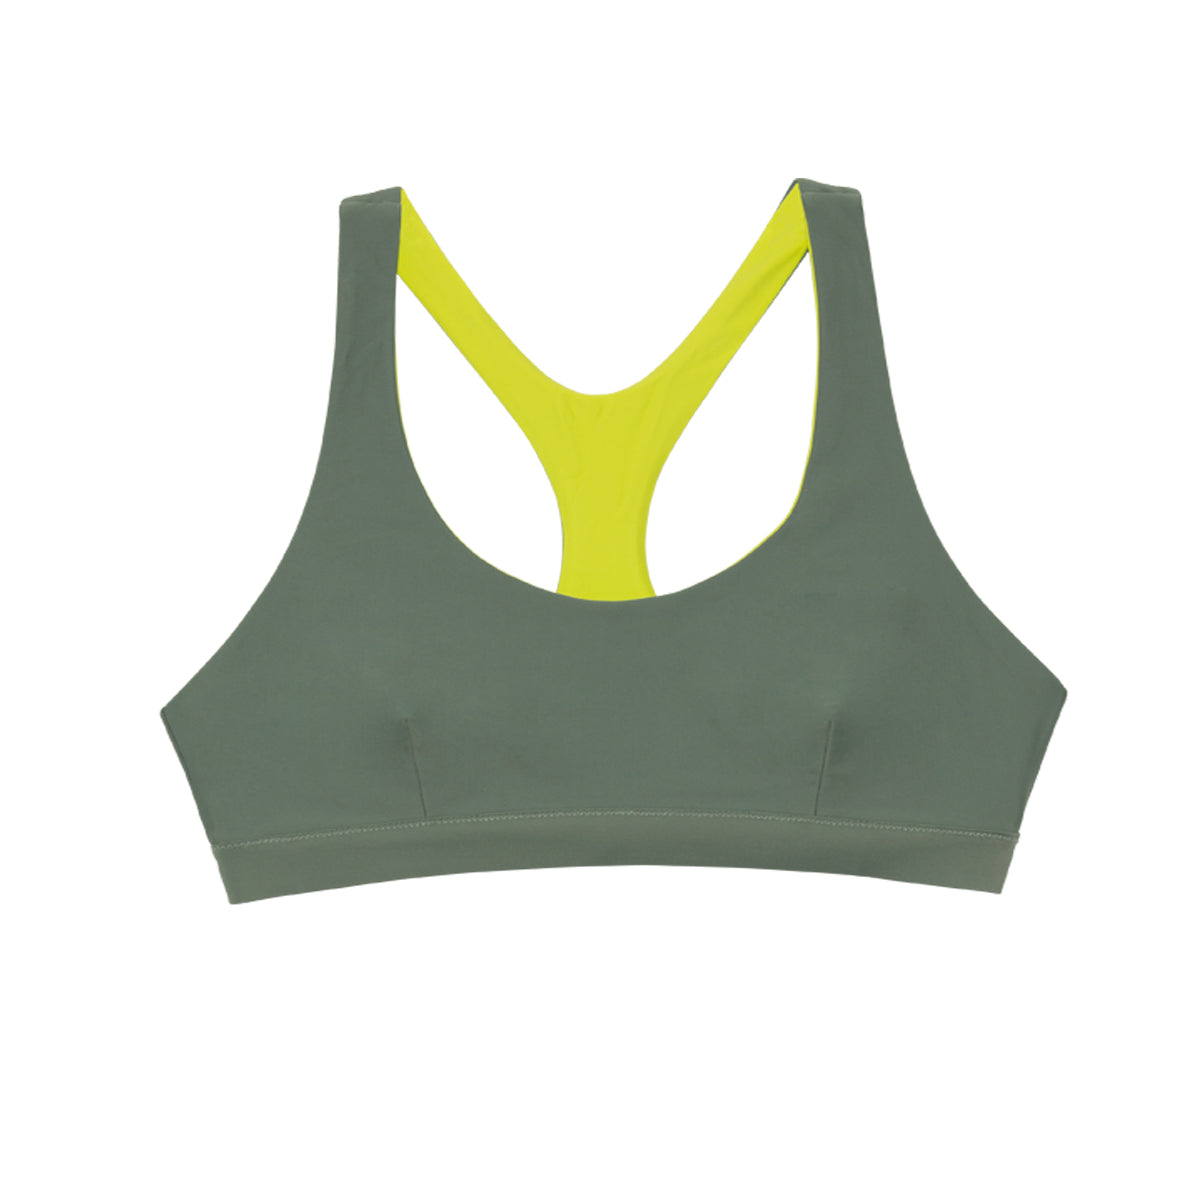 ImamaZin_Active_Swimwear_Mighty_Reversible_Crop_Top_Army_Front_a